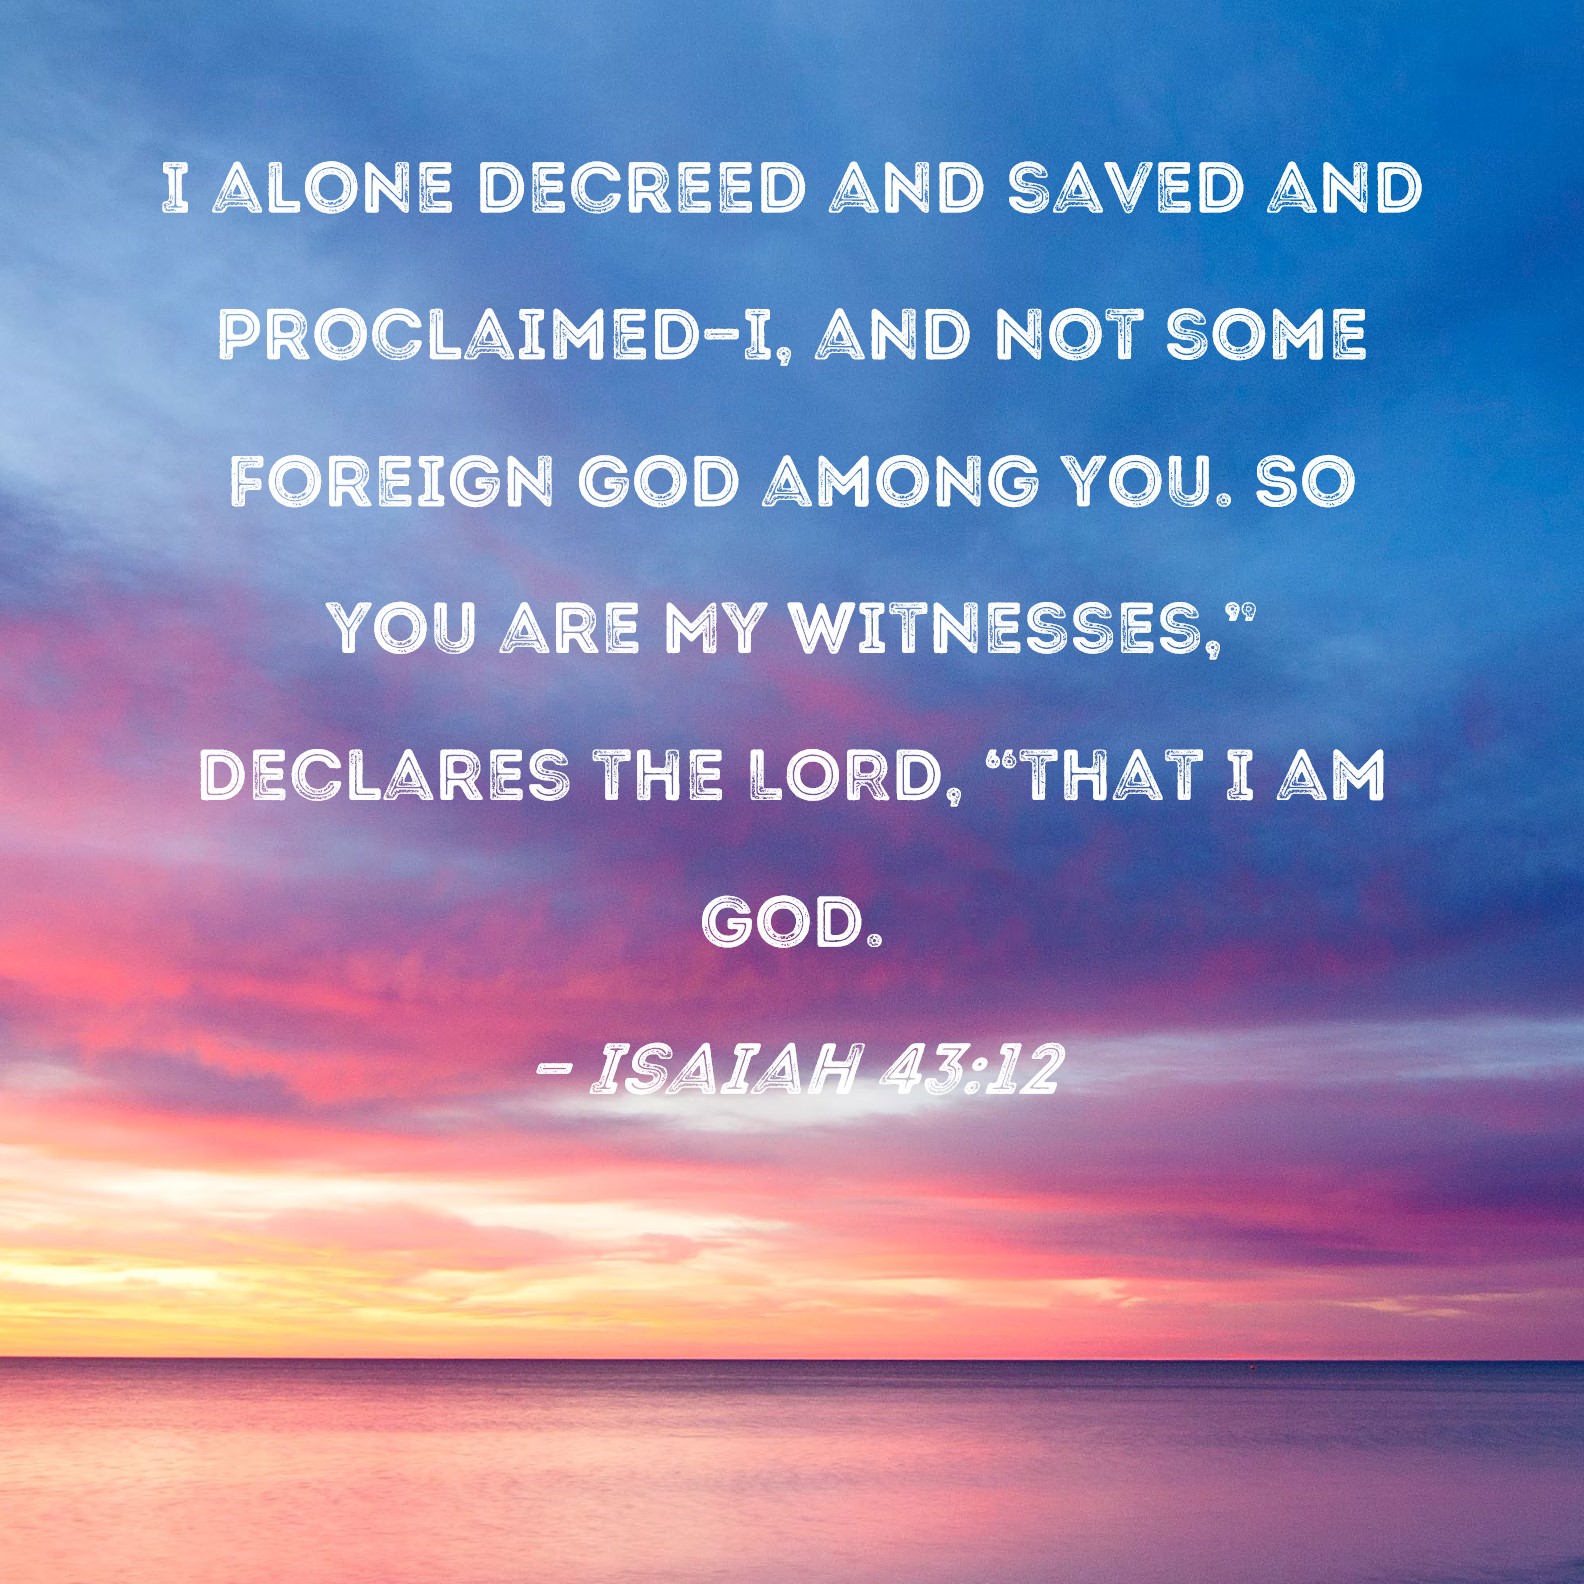 Isaiah 43:12 I alone decreed and saved and proclaimed--I, and not some ...